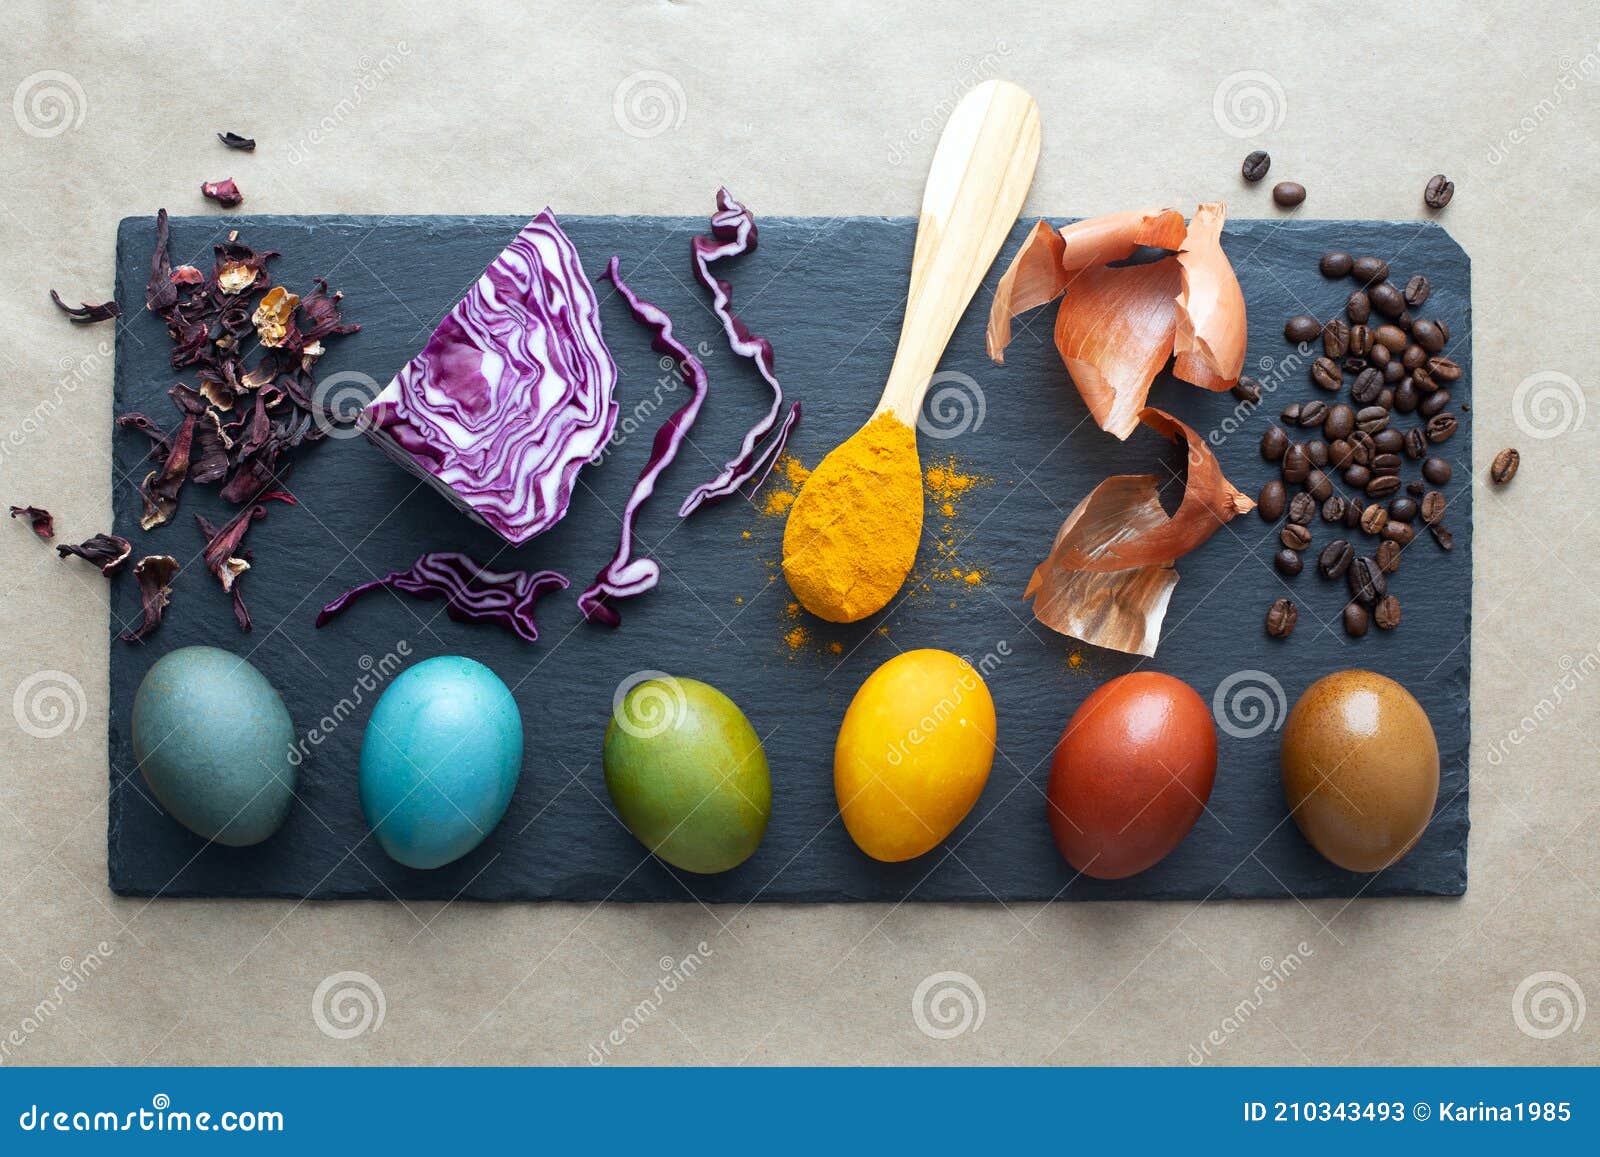 natural dye for easter eggs - carcade, red cabbage, turmeric, onion skin and coffee